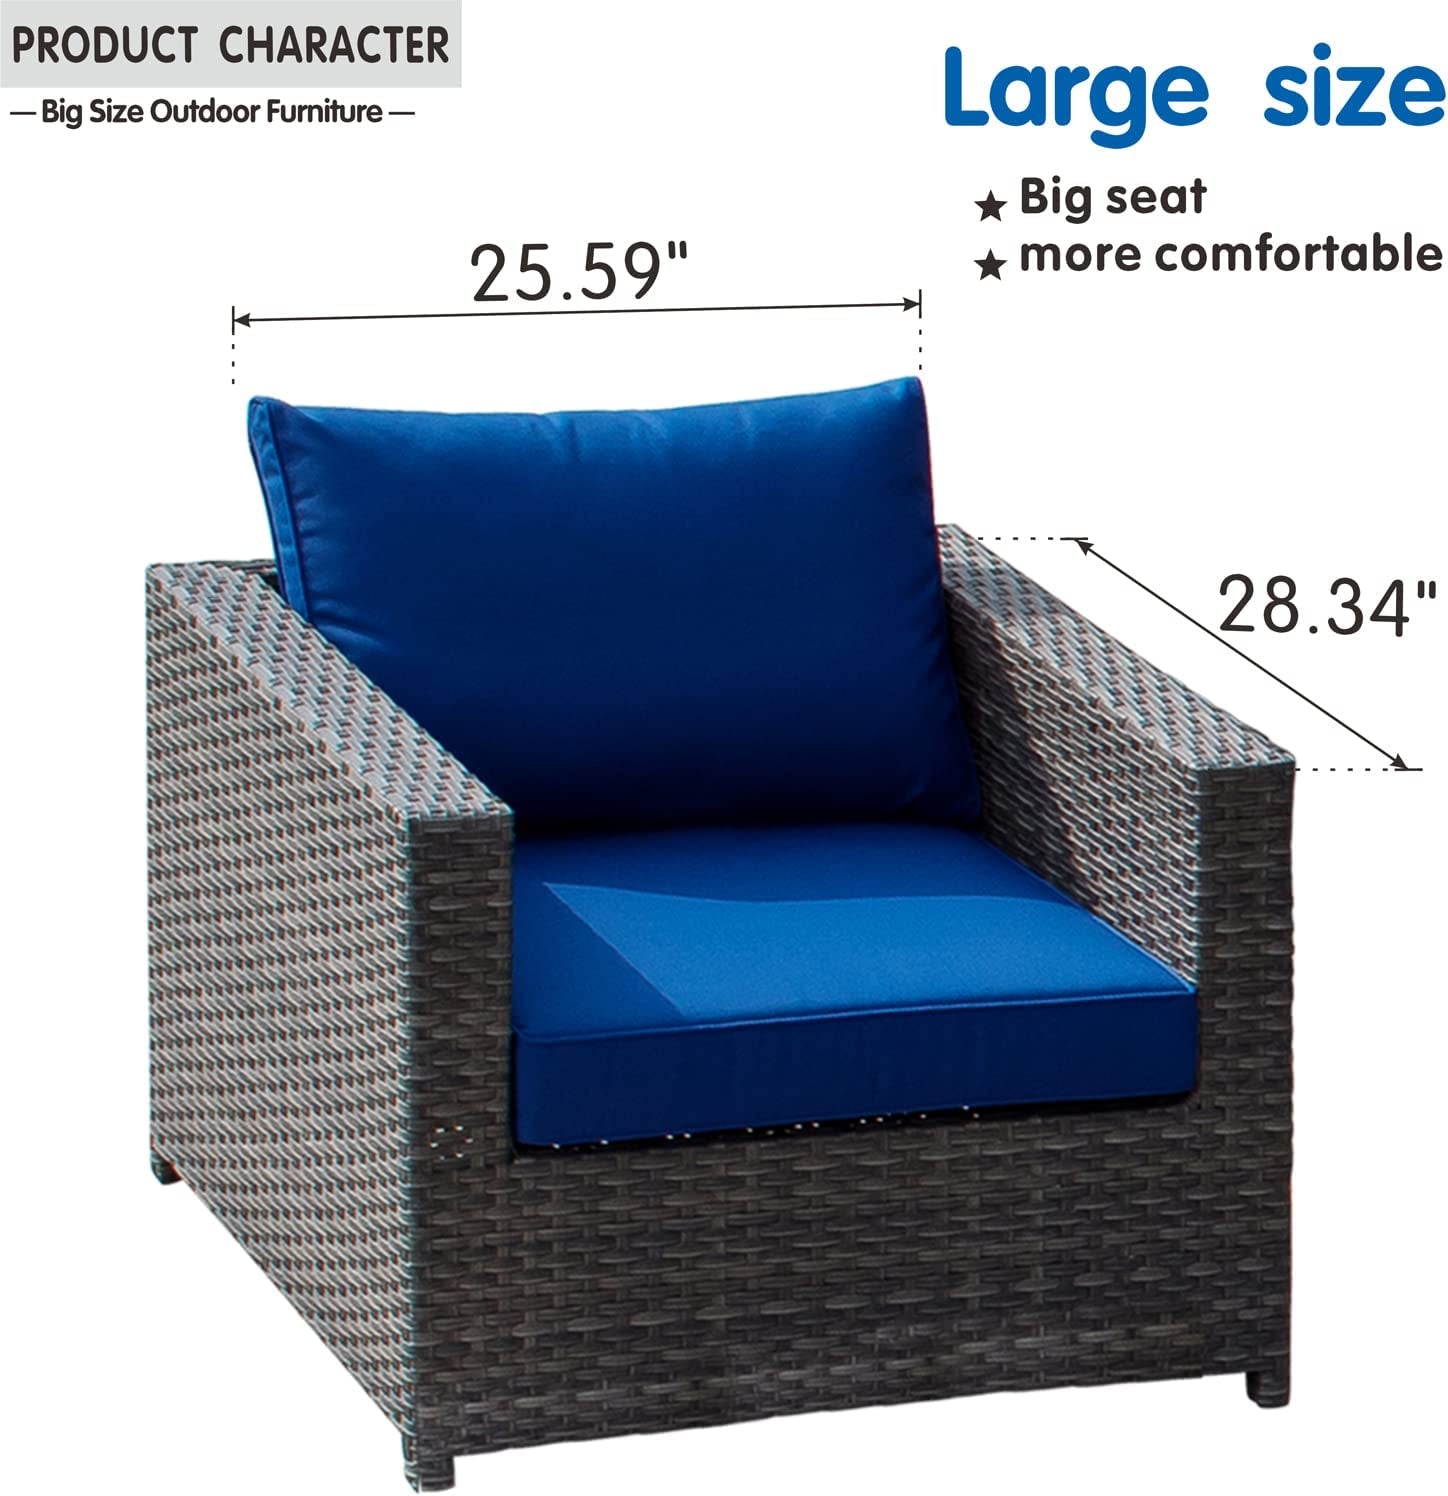 "Ultimate Outdoor Luxury: 12-Piece Patio Furniture Set with Stylish Design, No Assembly Needed, All-Weather Wicker, Aluminum Frame, Includes 4 Pillows and 2 Furniture Covers - Grey Wicker with Navy Blue Accents"